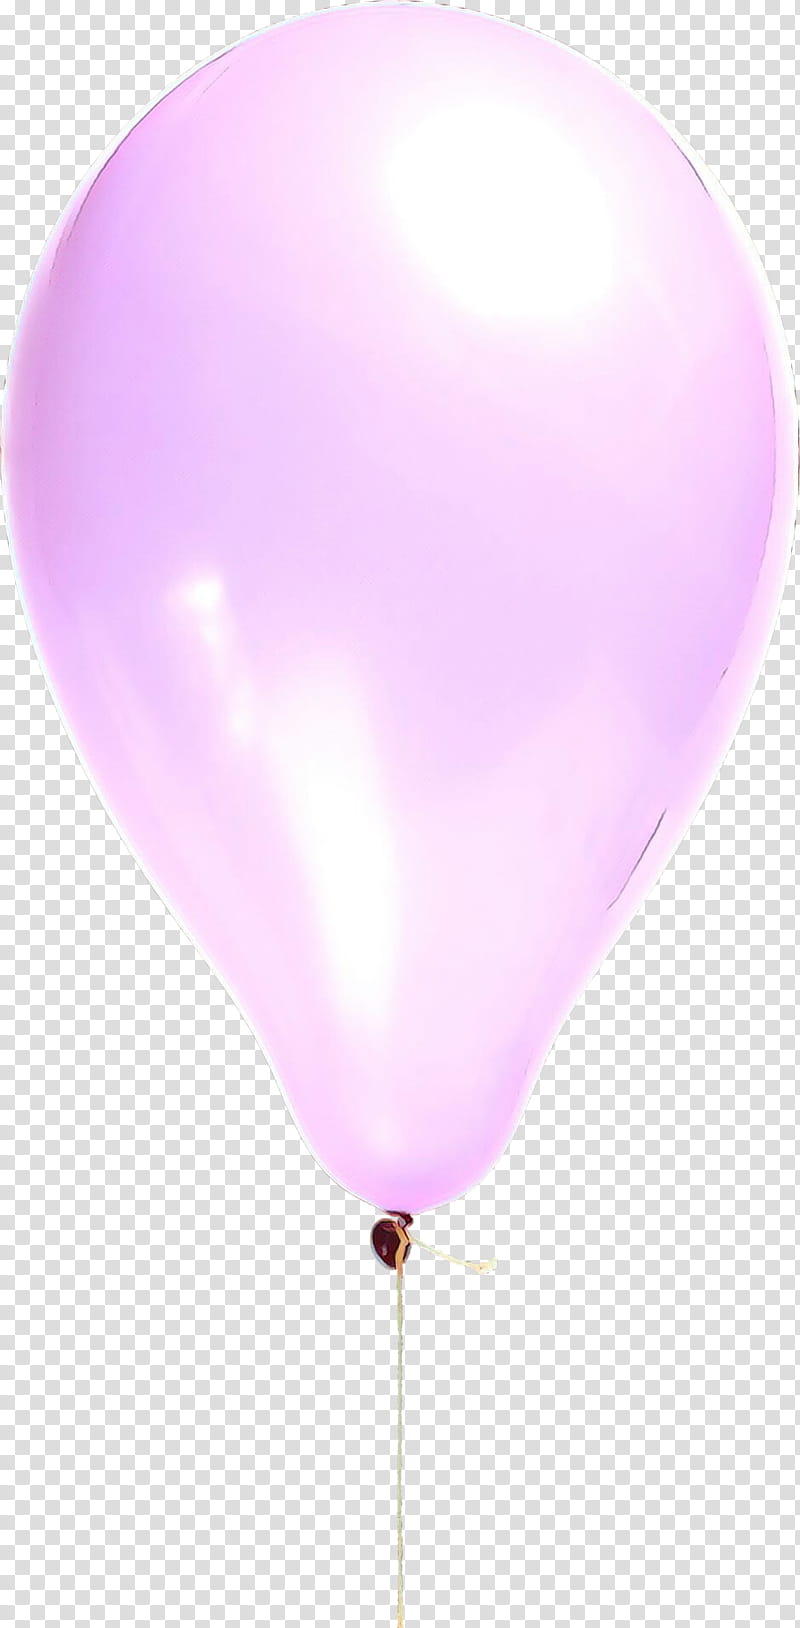 Heart Balloon, Cartoon, Pink M, Violet, Purple, Party Supply, Lighting, Magenta transparent background PNG clipart